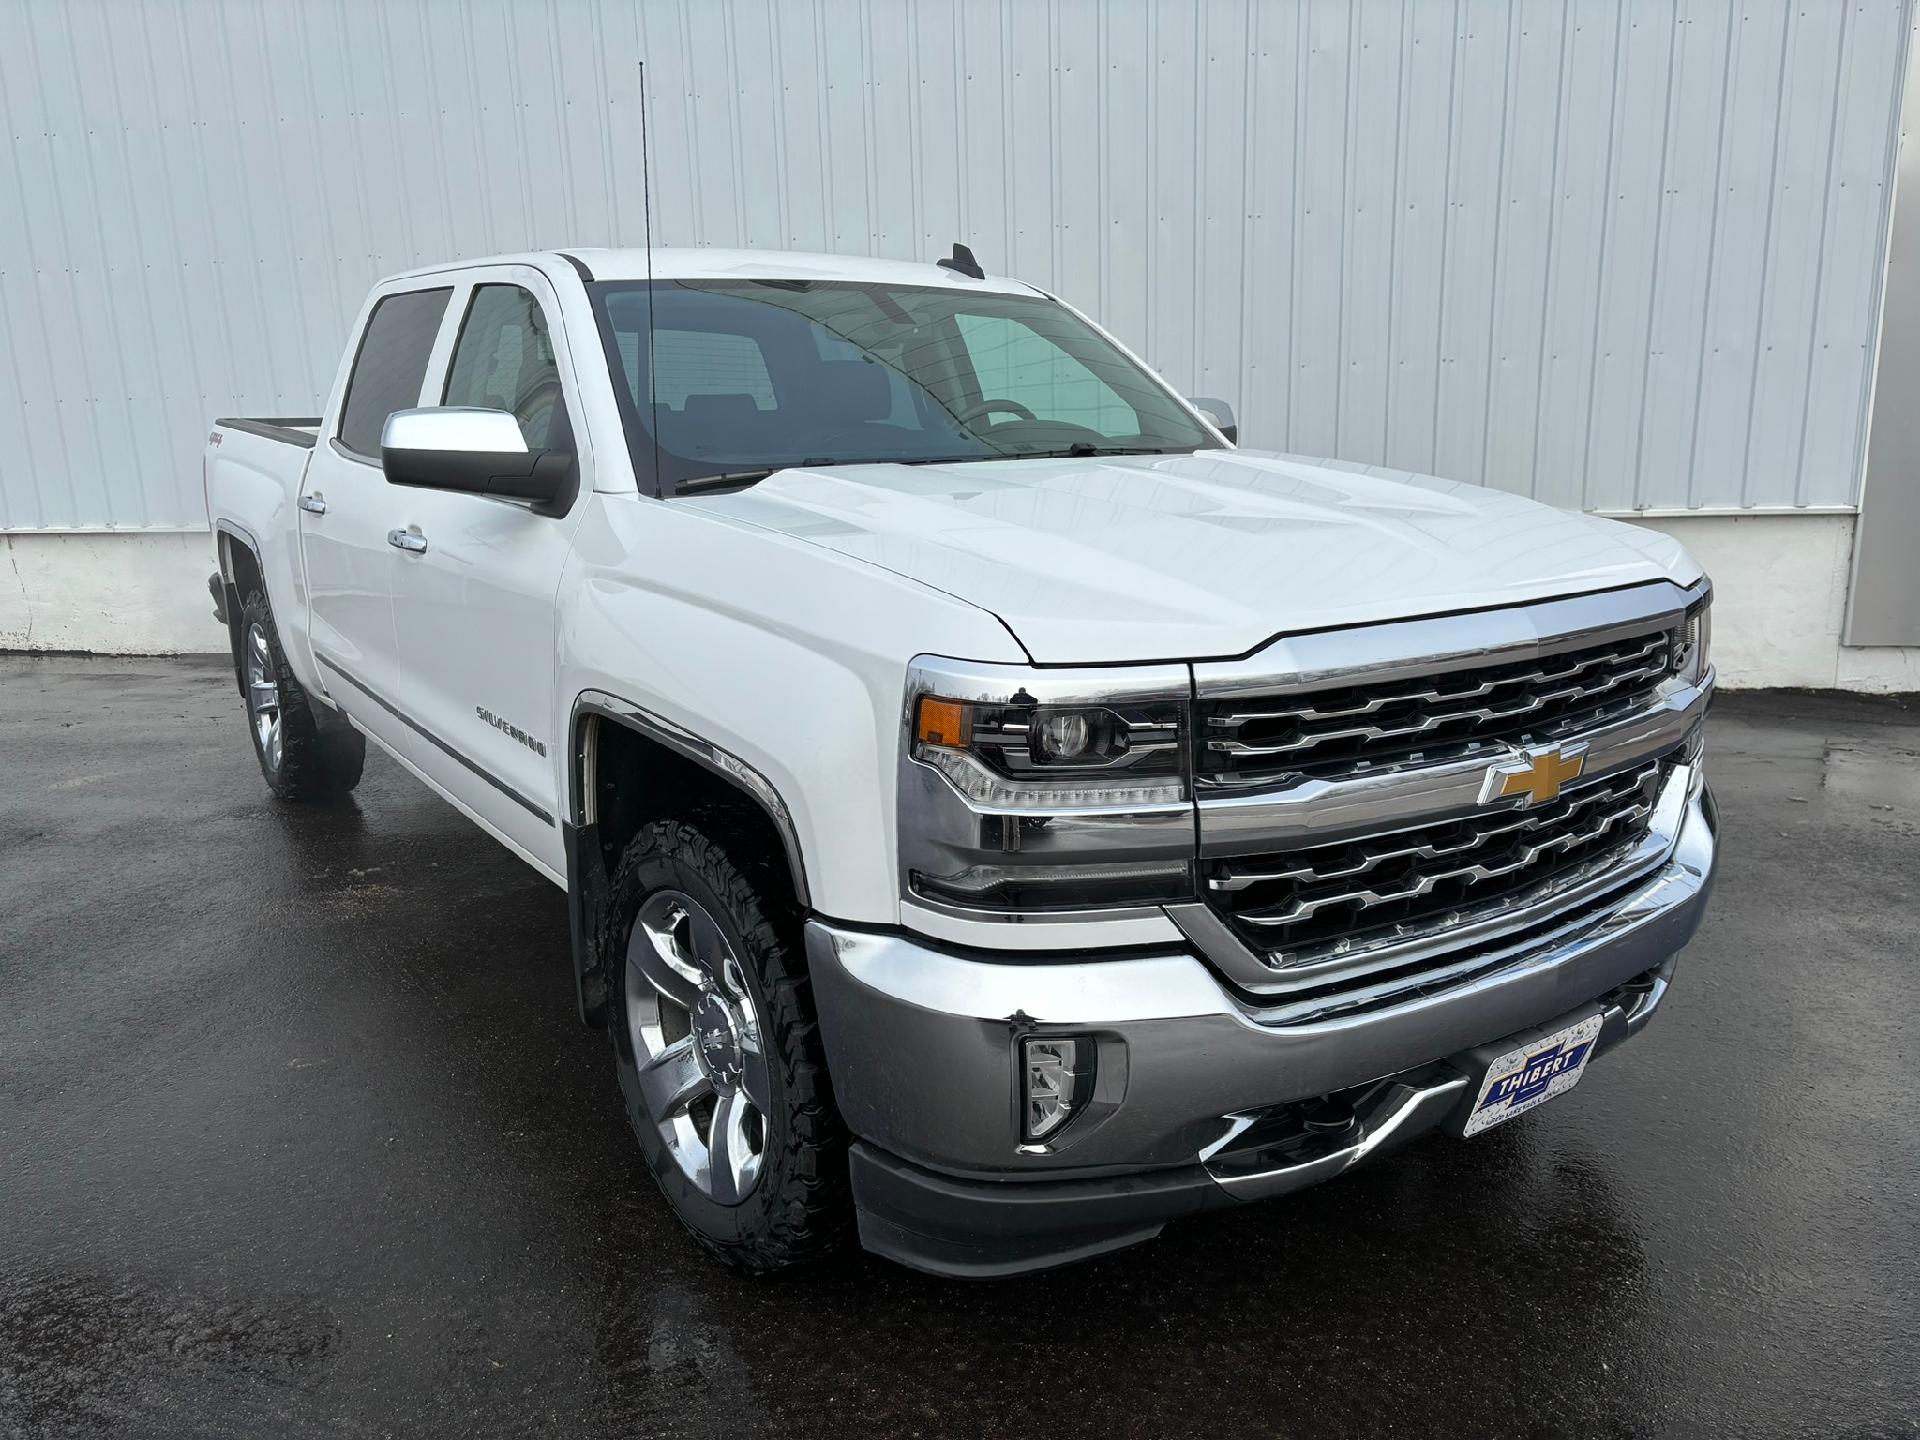 Used 2017 Chevrolet Silverado 1500 LTZ with VIN 3GCUKSECXHG483594 for sale in Red Lake Falls, Minnesota